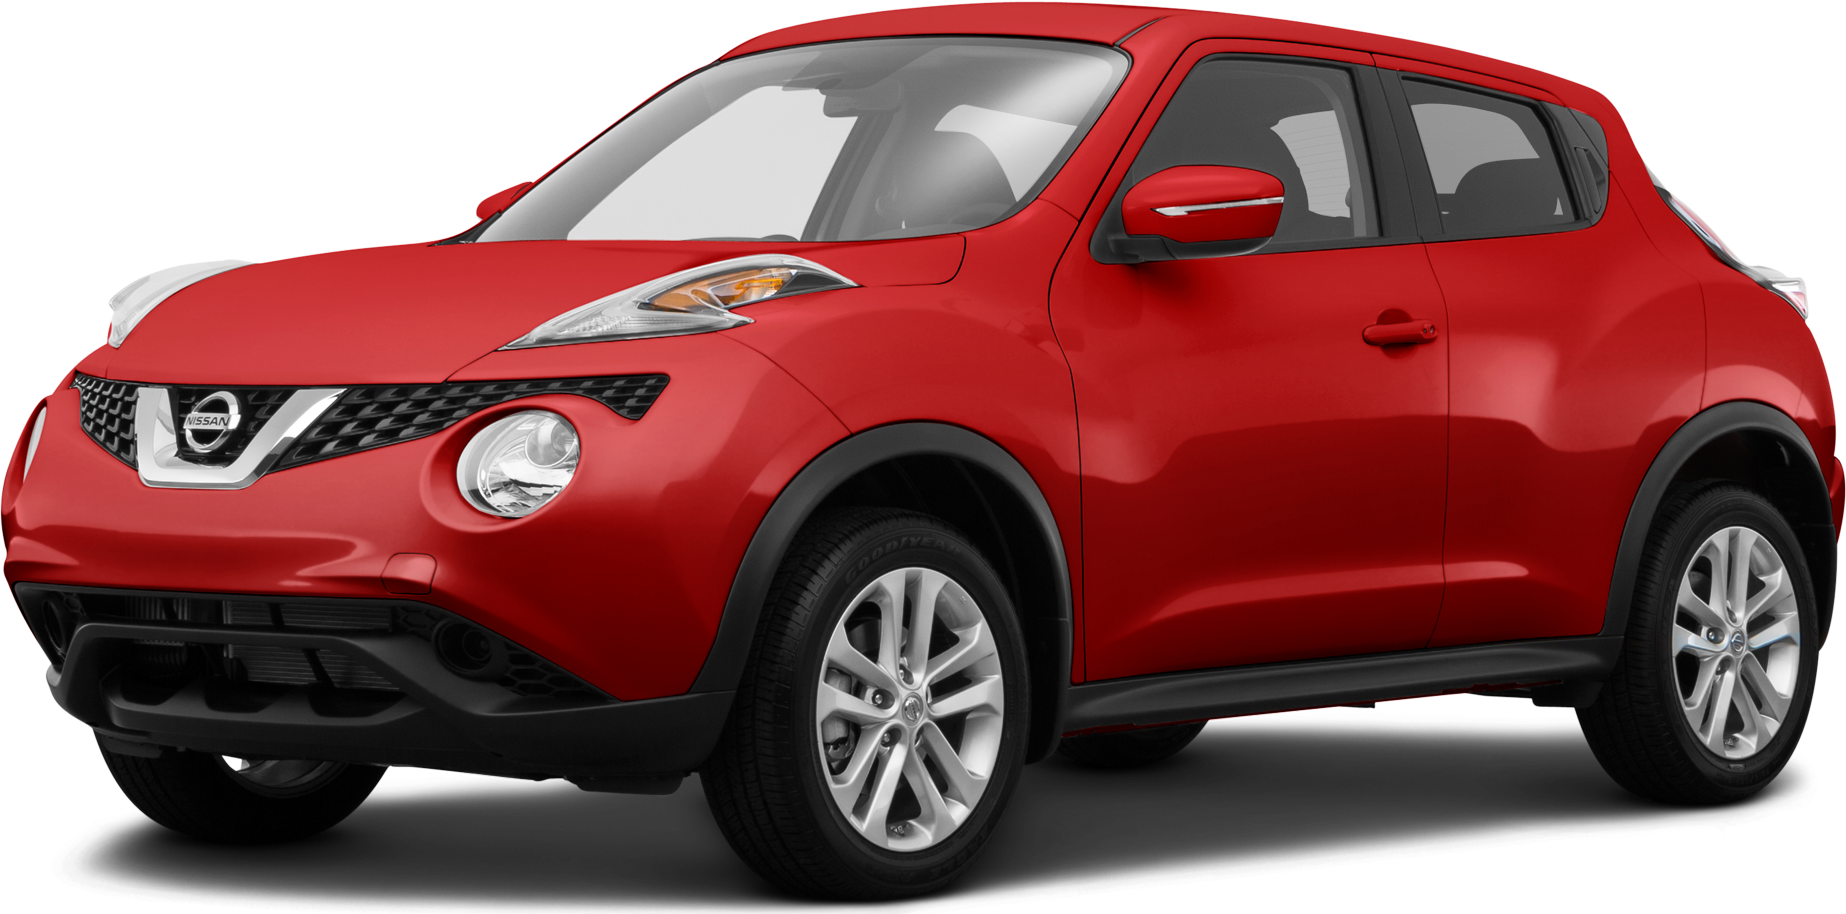 2017 Nissan Juke SUV: Latest Prices, Reviews, Specs, Photos and